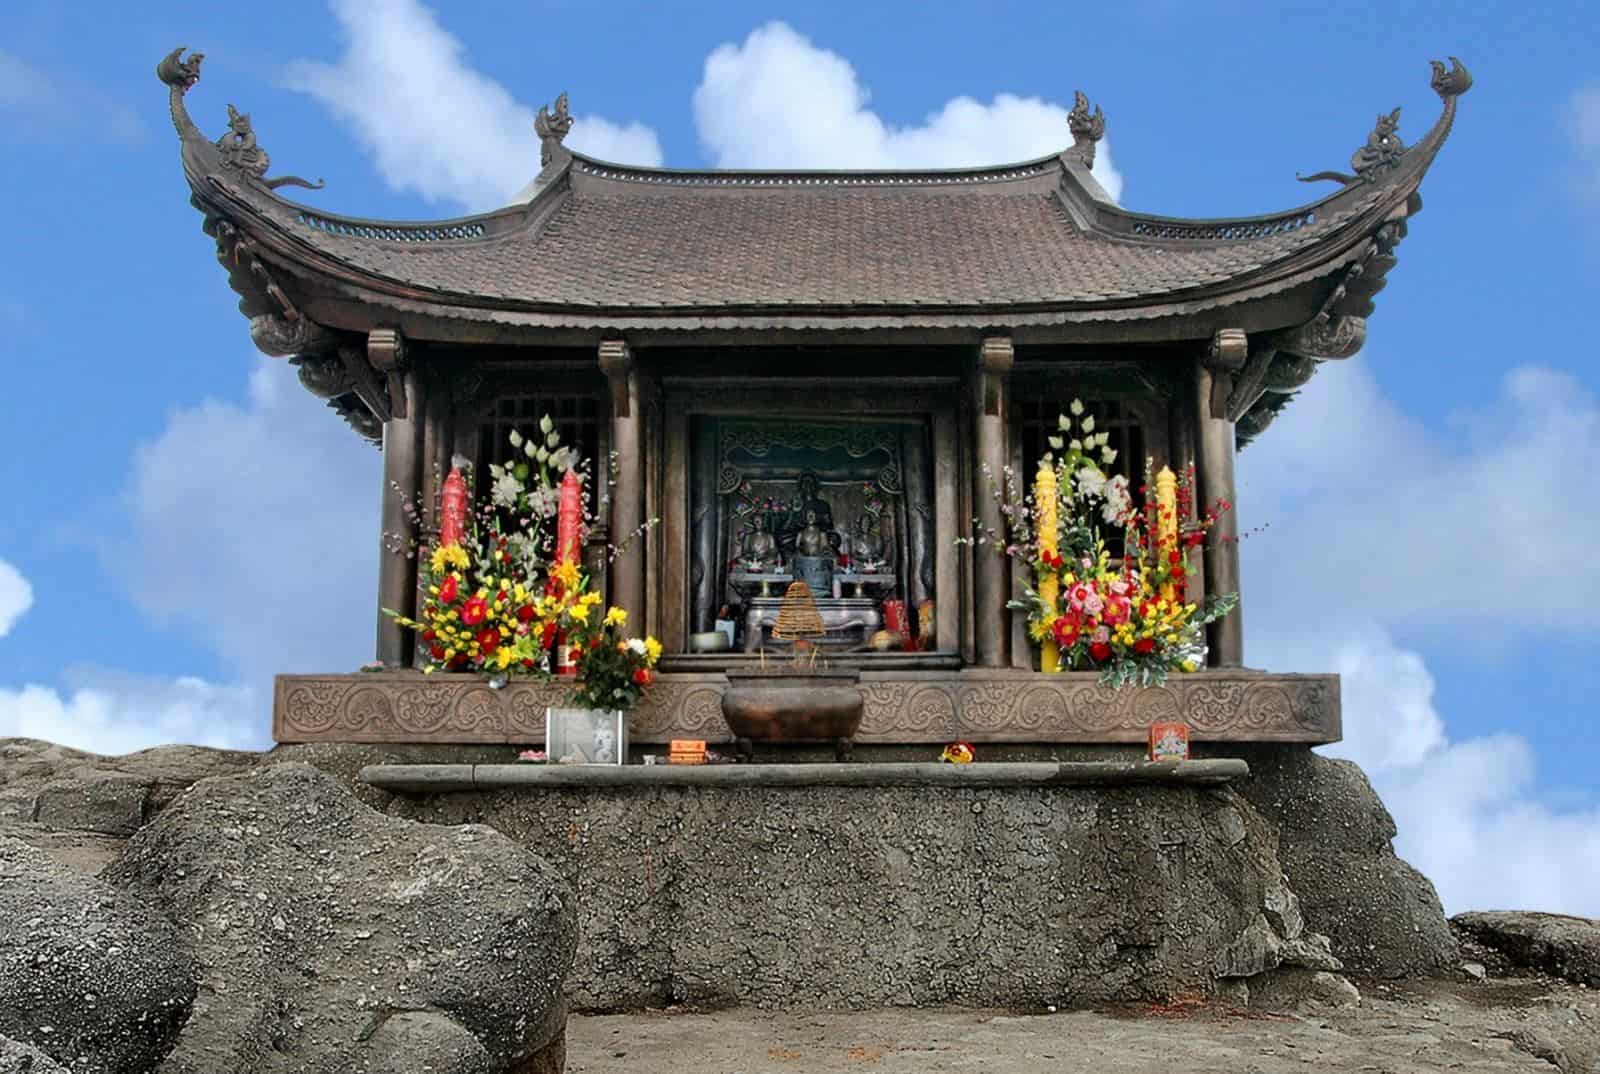 What to see and do in Yen Tu pagoda